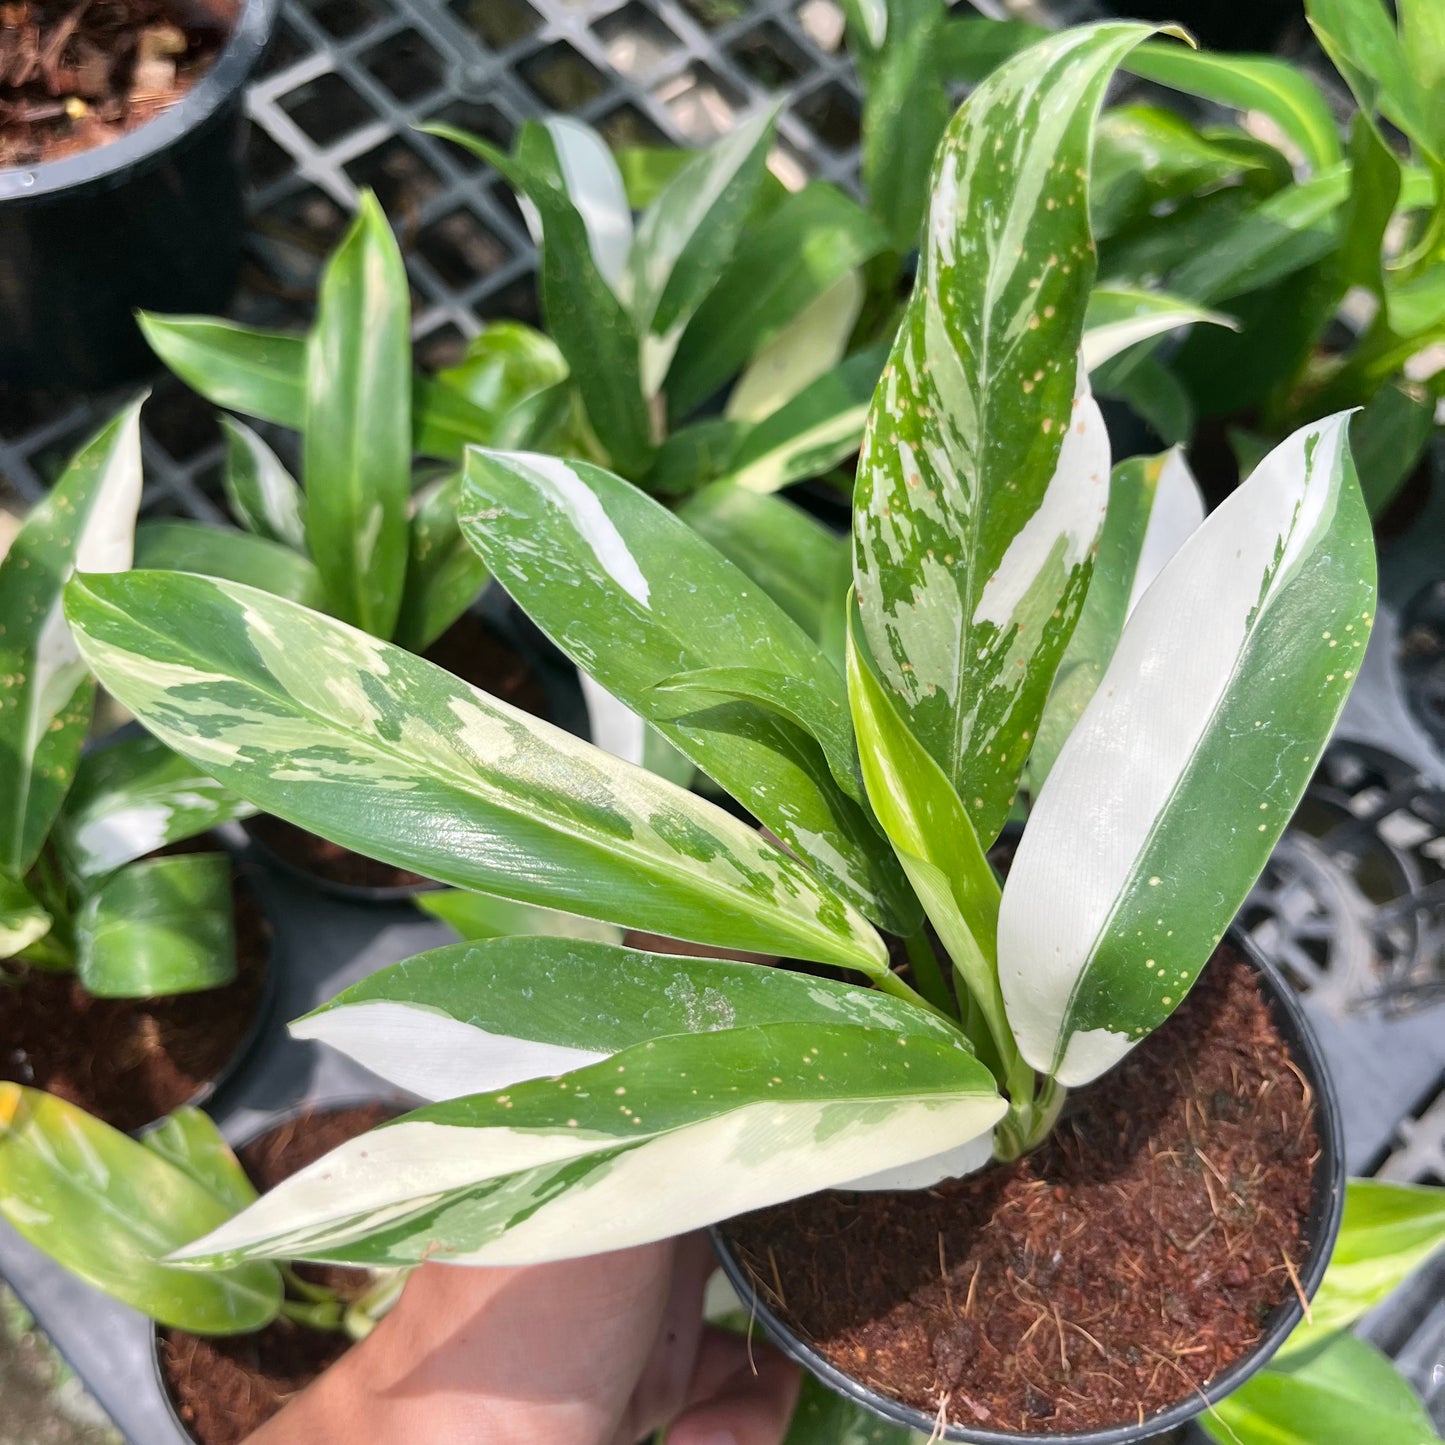 Philodendron Wend-Imbe Variegated